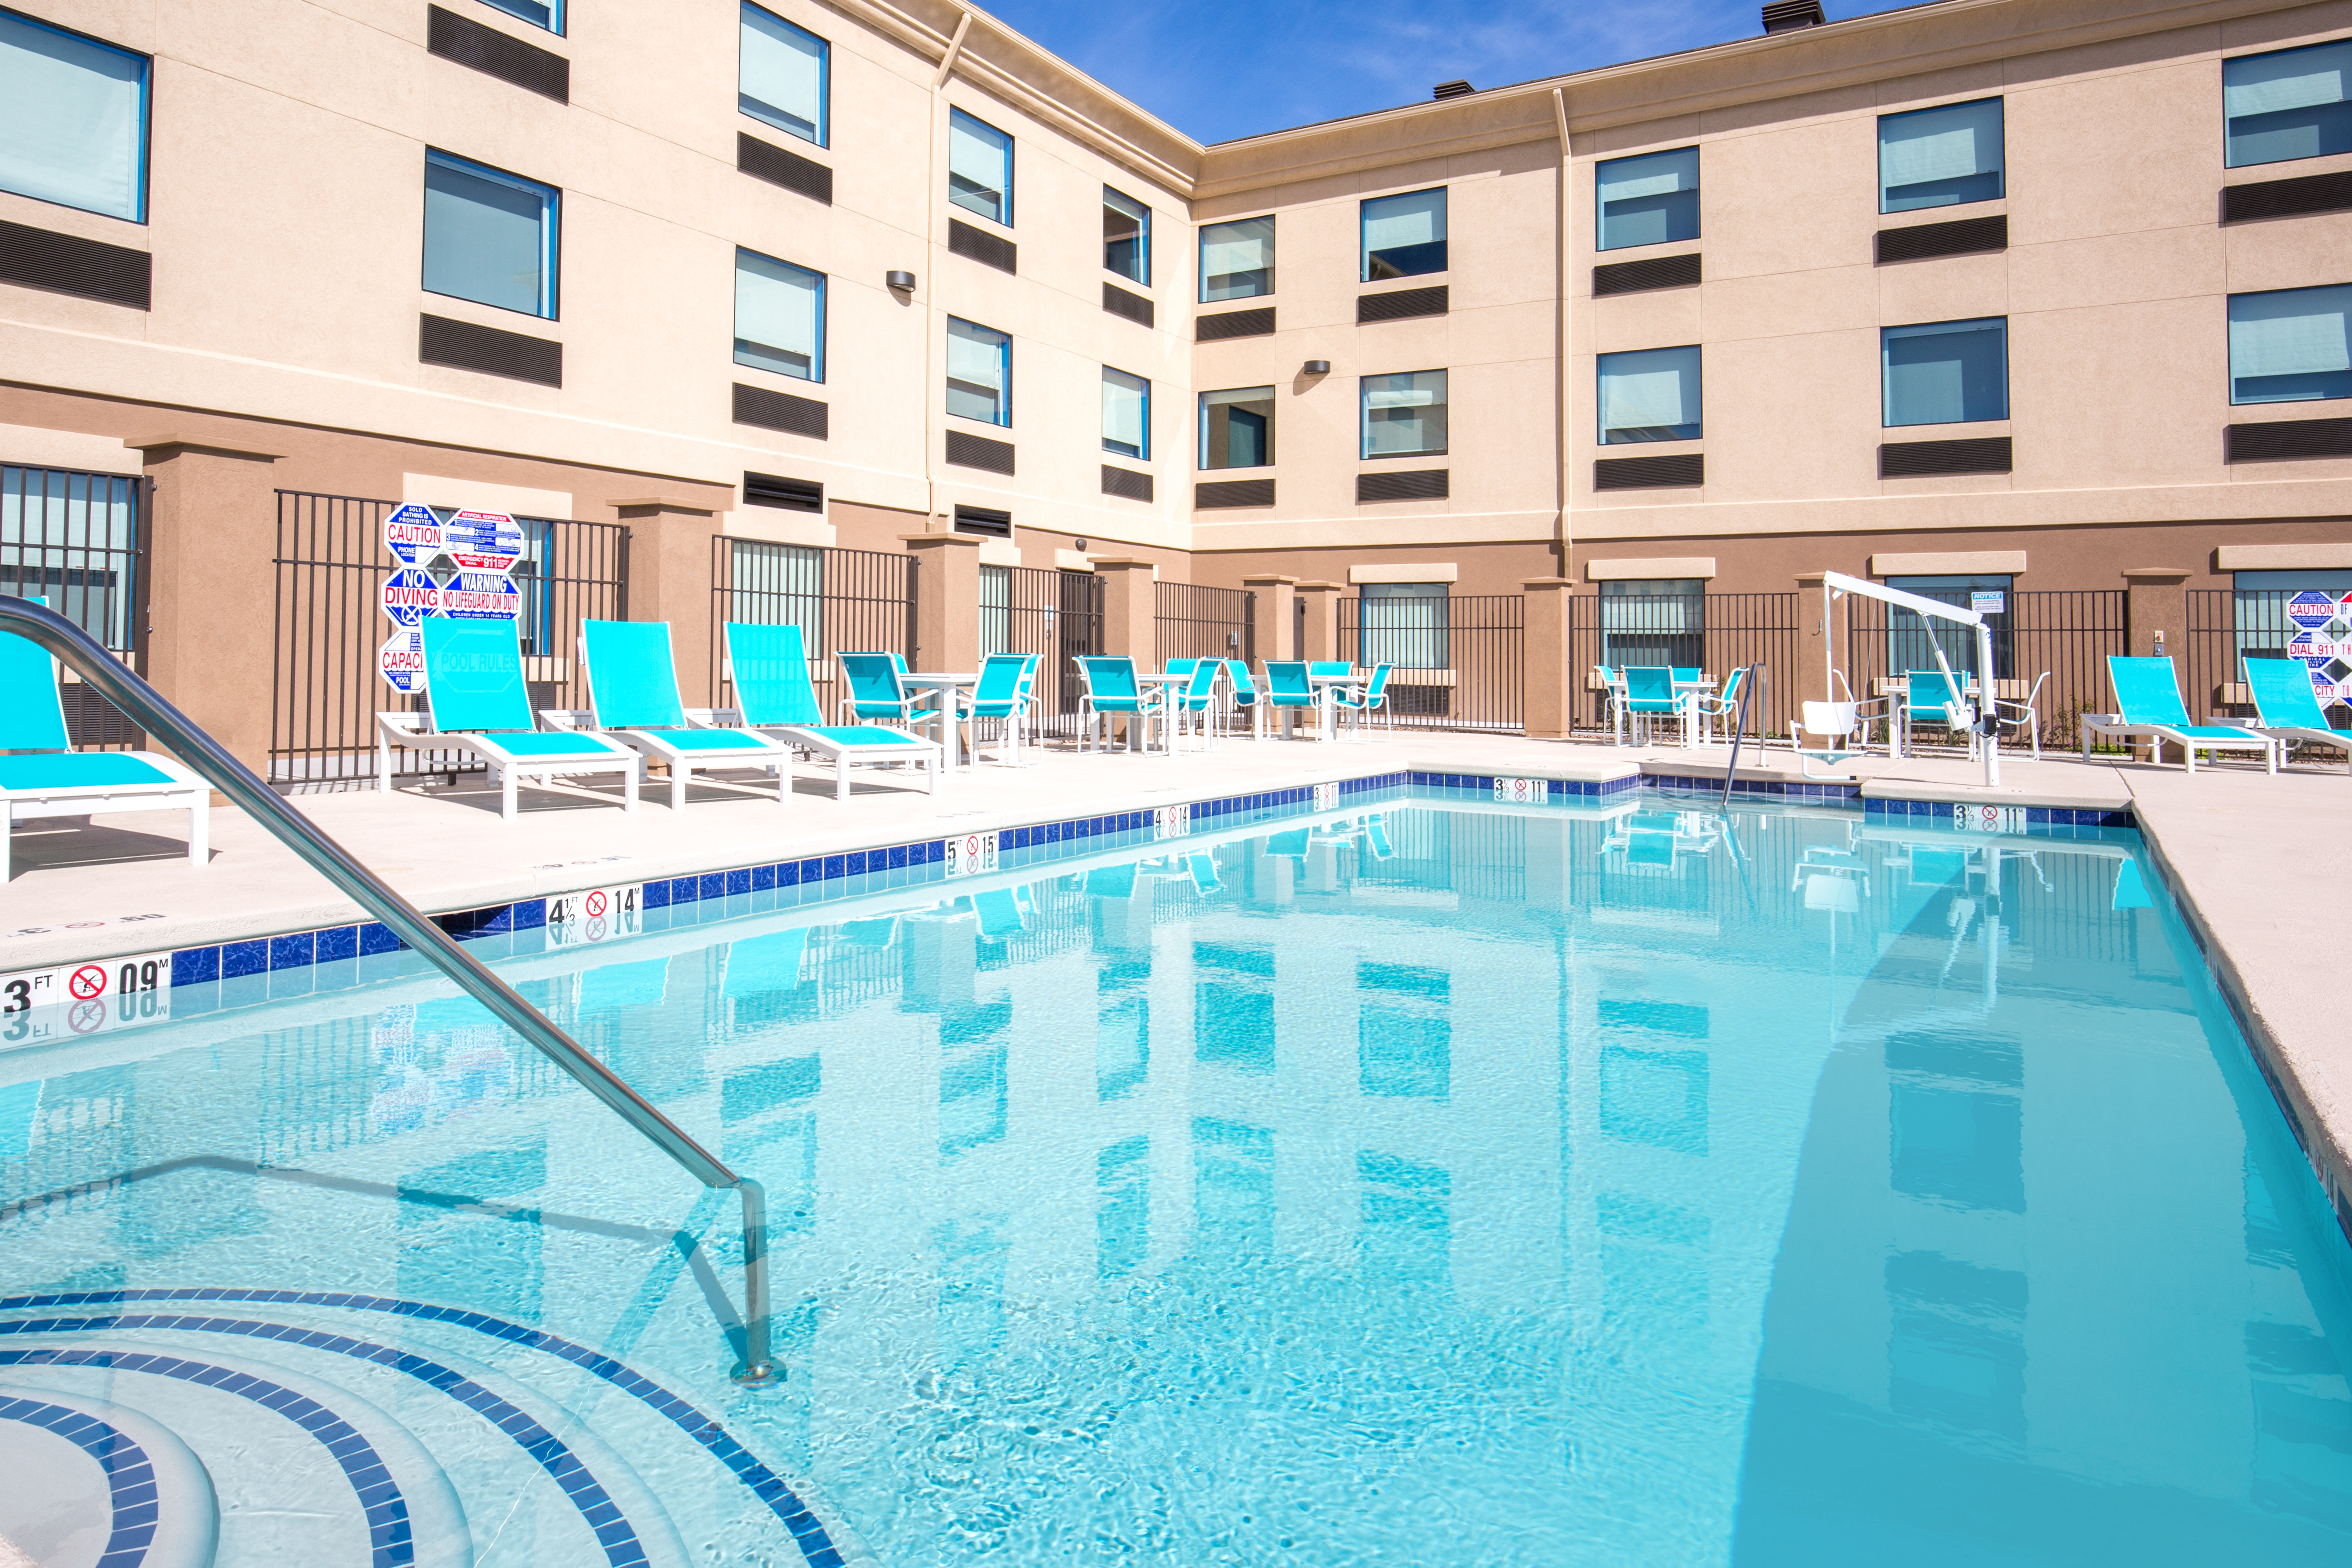 Enjoy our heated outdoor pool year round